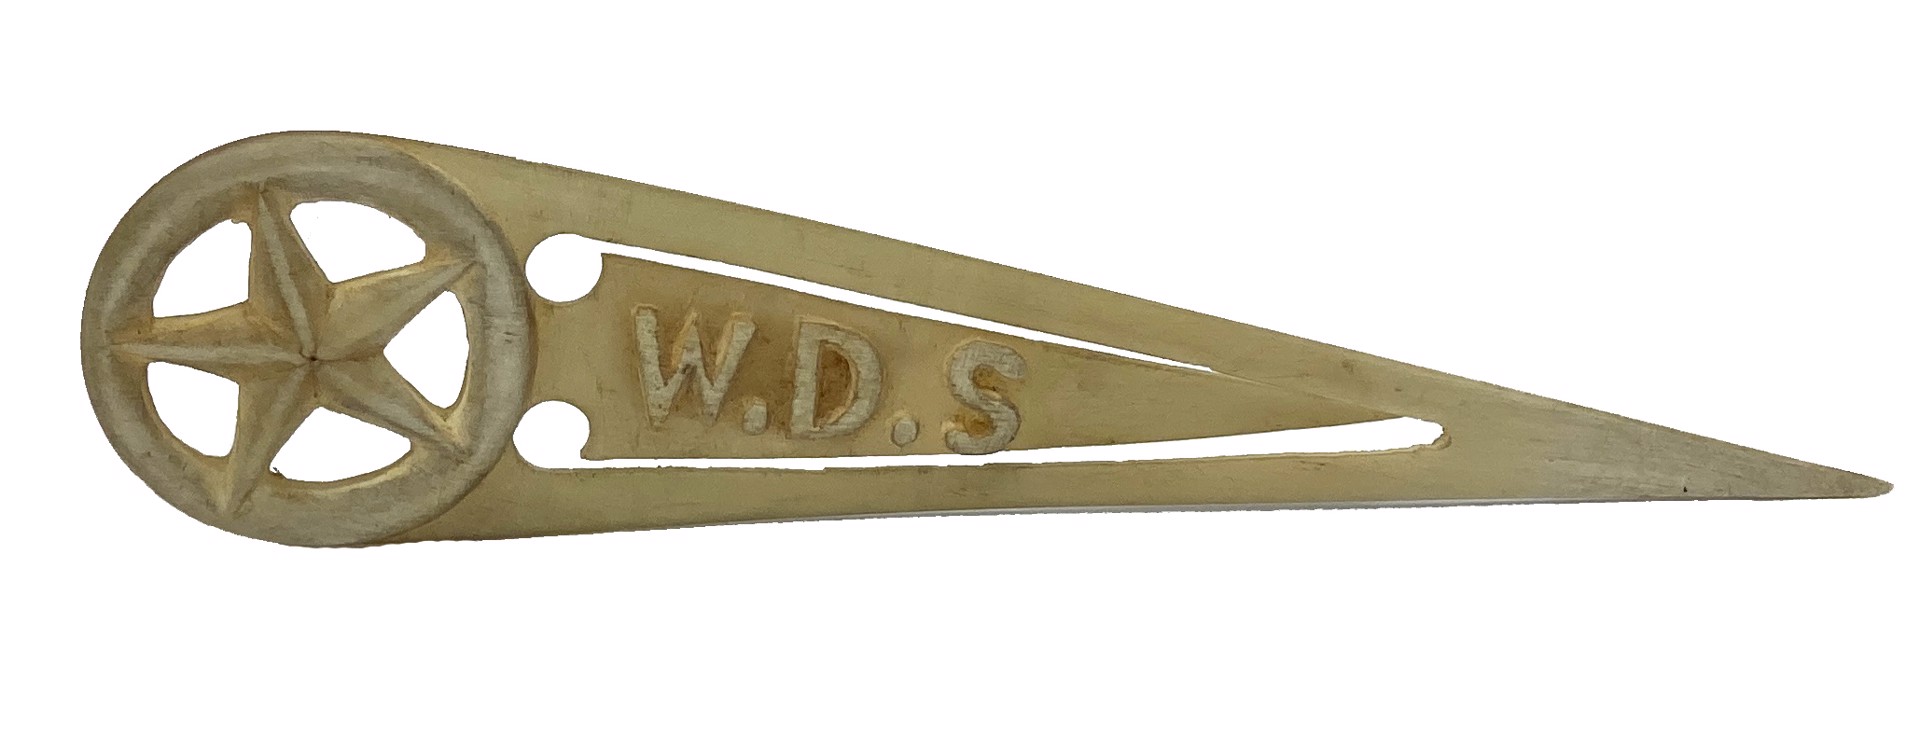 DS-15: blonde horn bookmark with initials WDS and star by Dan Super